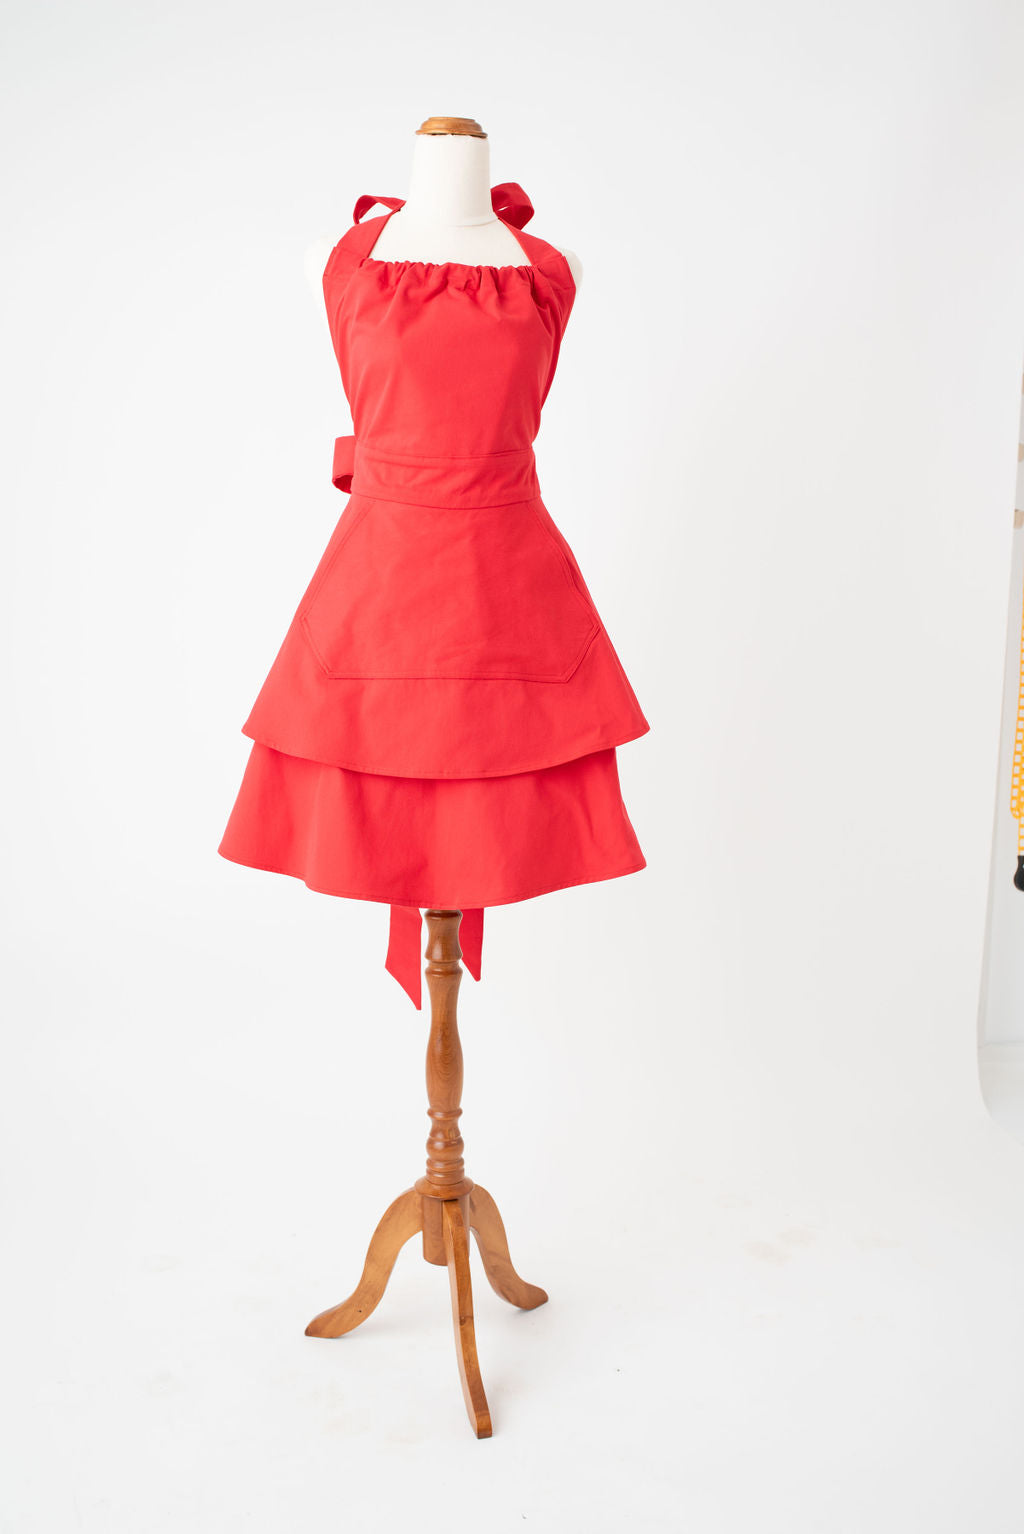 High waist feminine hostess apron in red by Pretty Made - front 